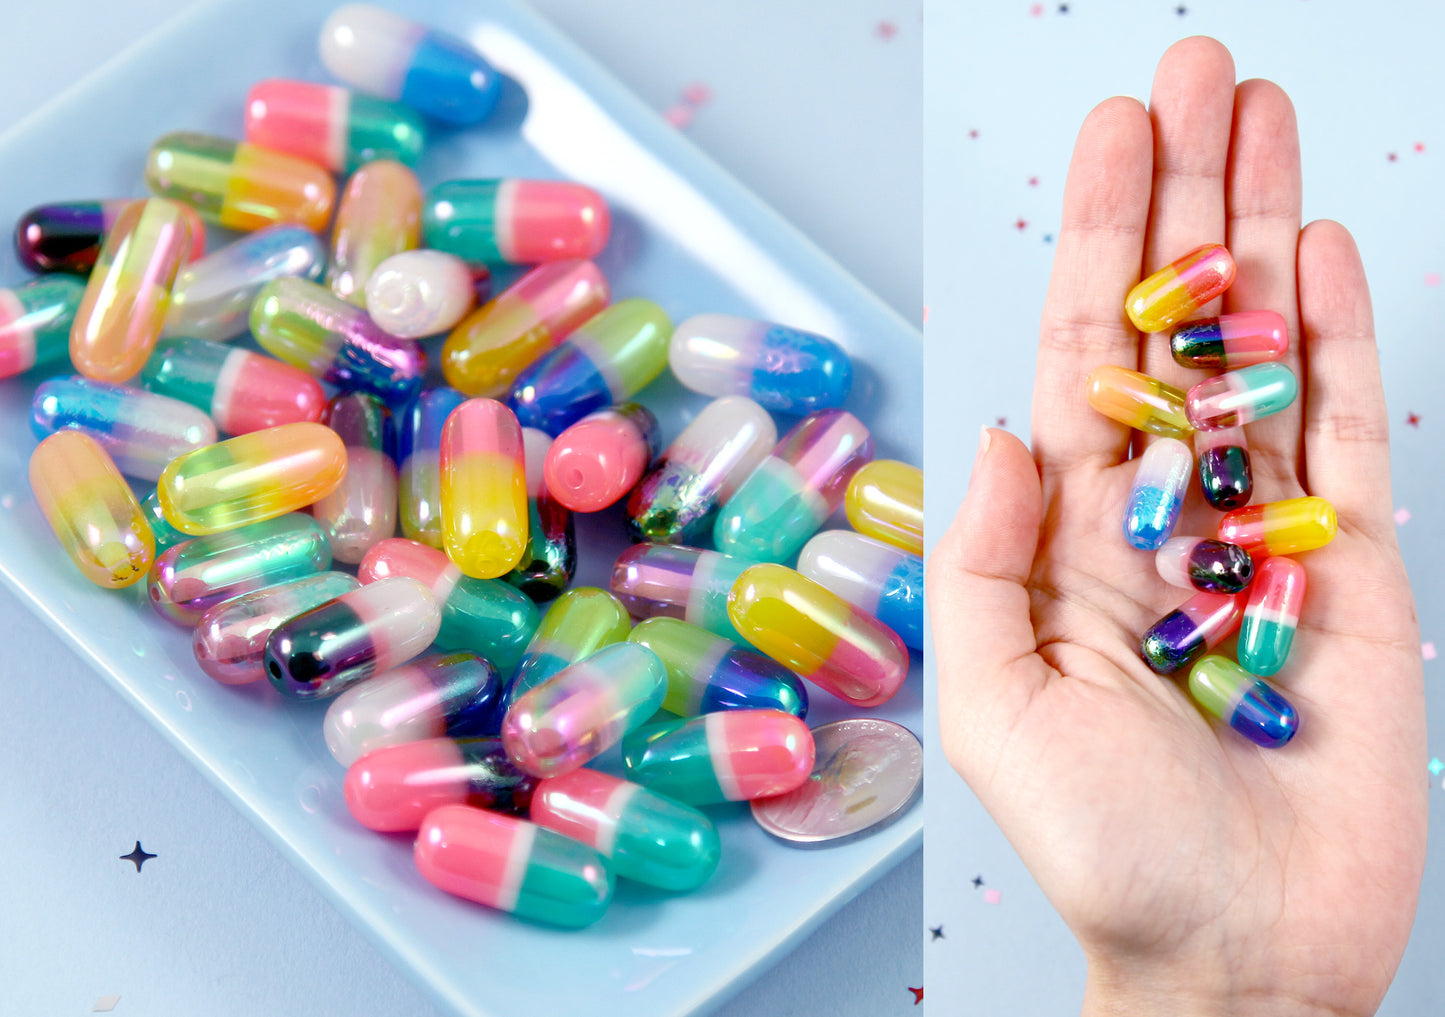 Pill Beads - 21mm Colorful Capsules Fake Pills Plastic or Resin Beads - 10 pc set